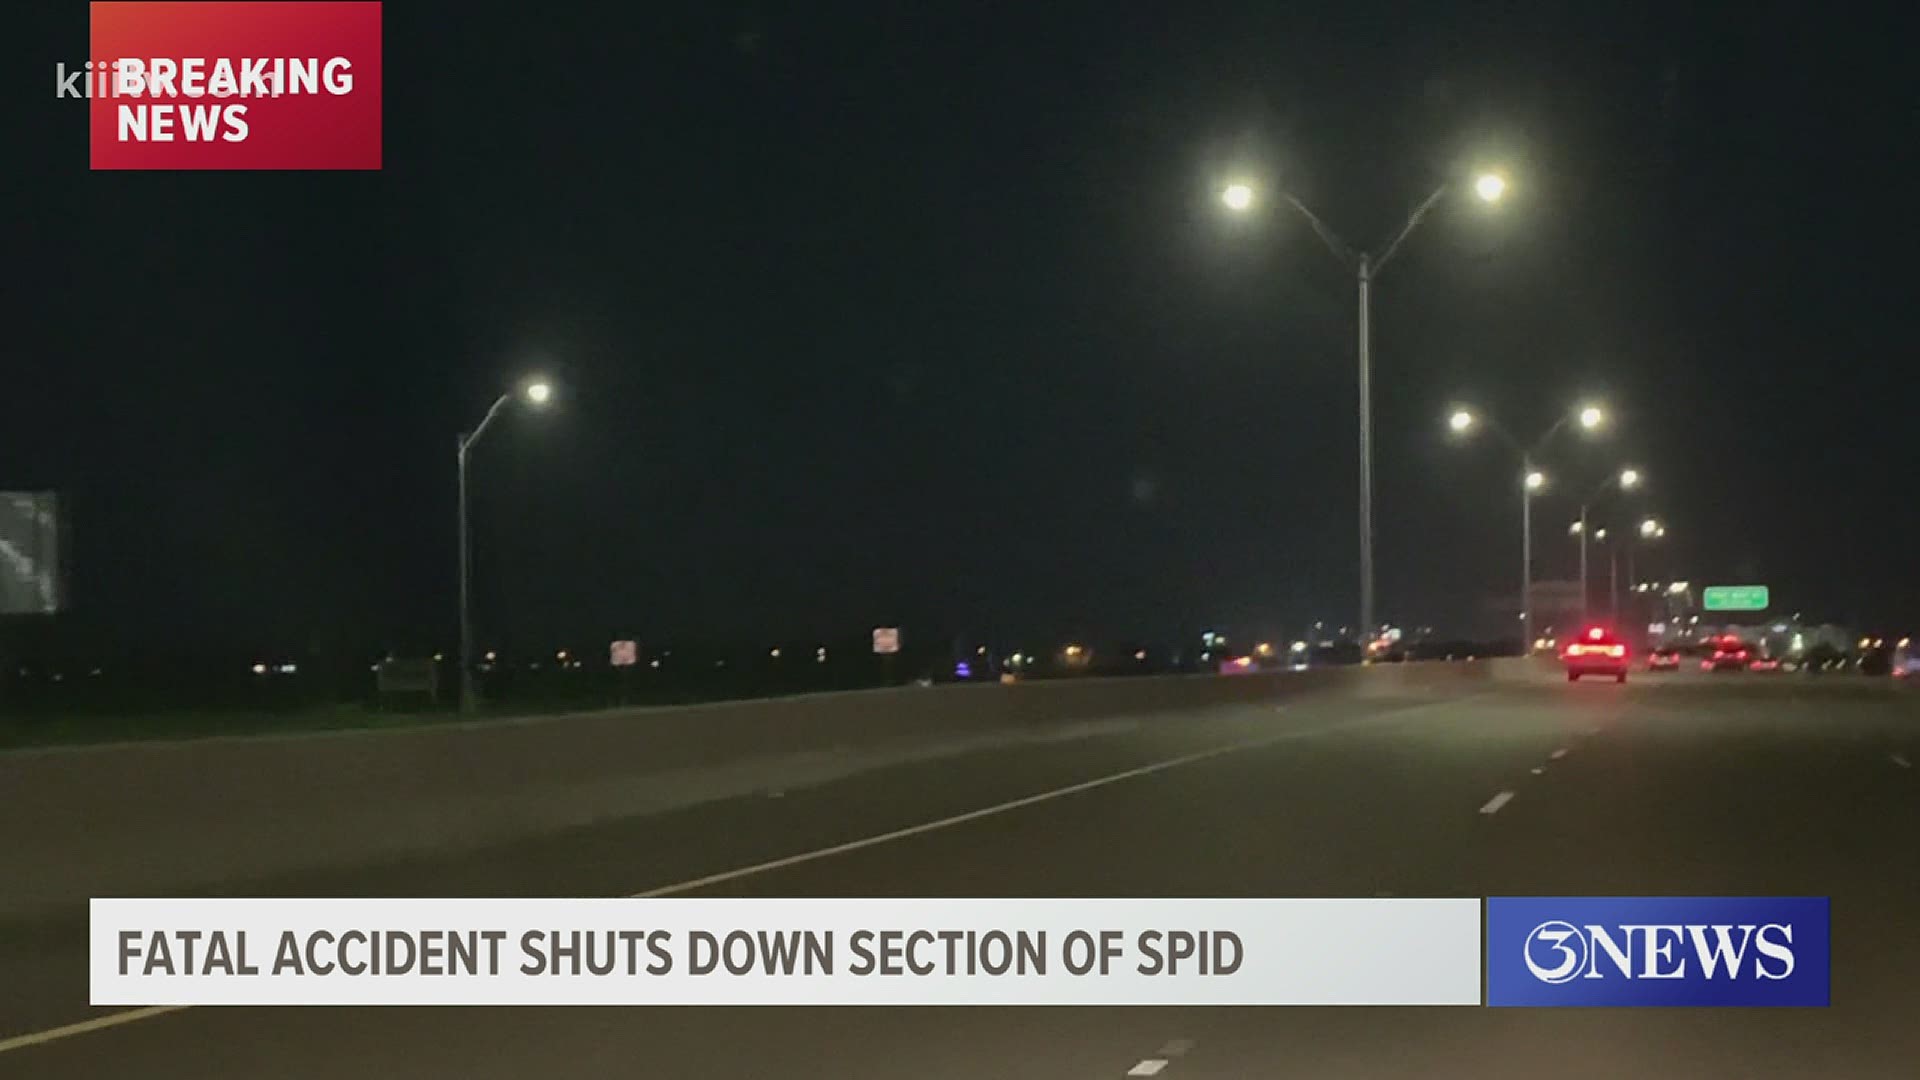 Around 8:00 p.m., officers were called to investigate a fatal crash along SPID. All westbound lanes from Flour Bluff Dr. to Ennis Joslin Rd. have been closed.